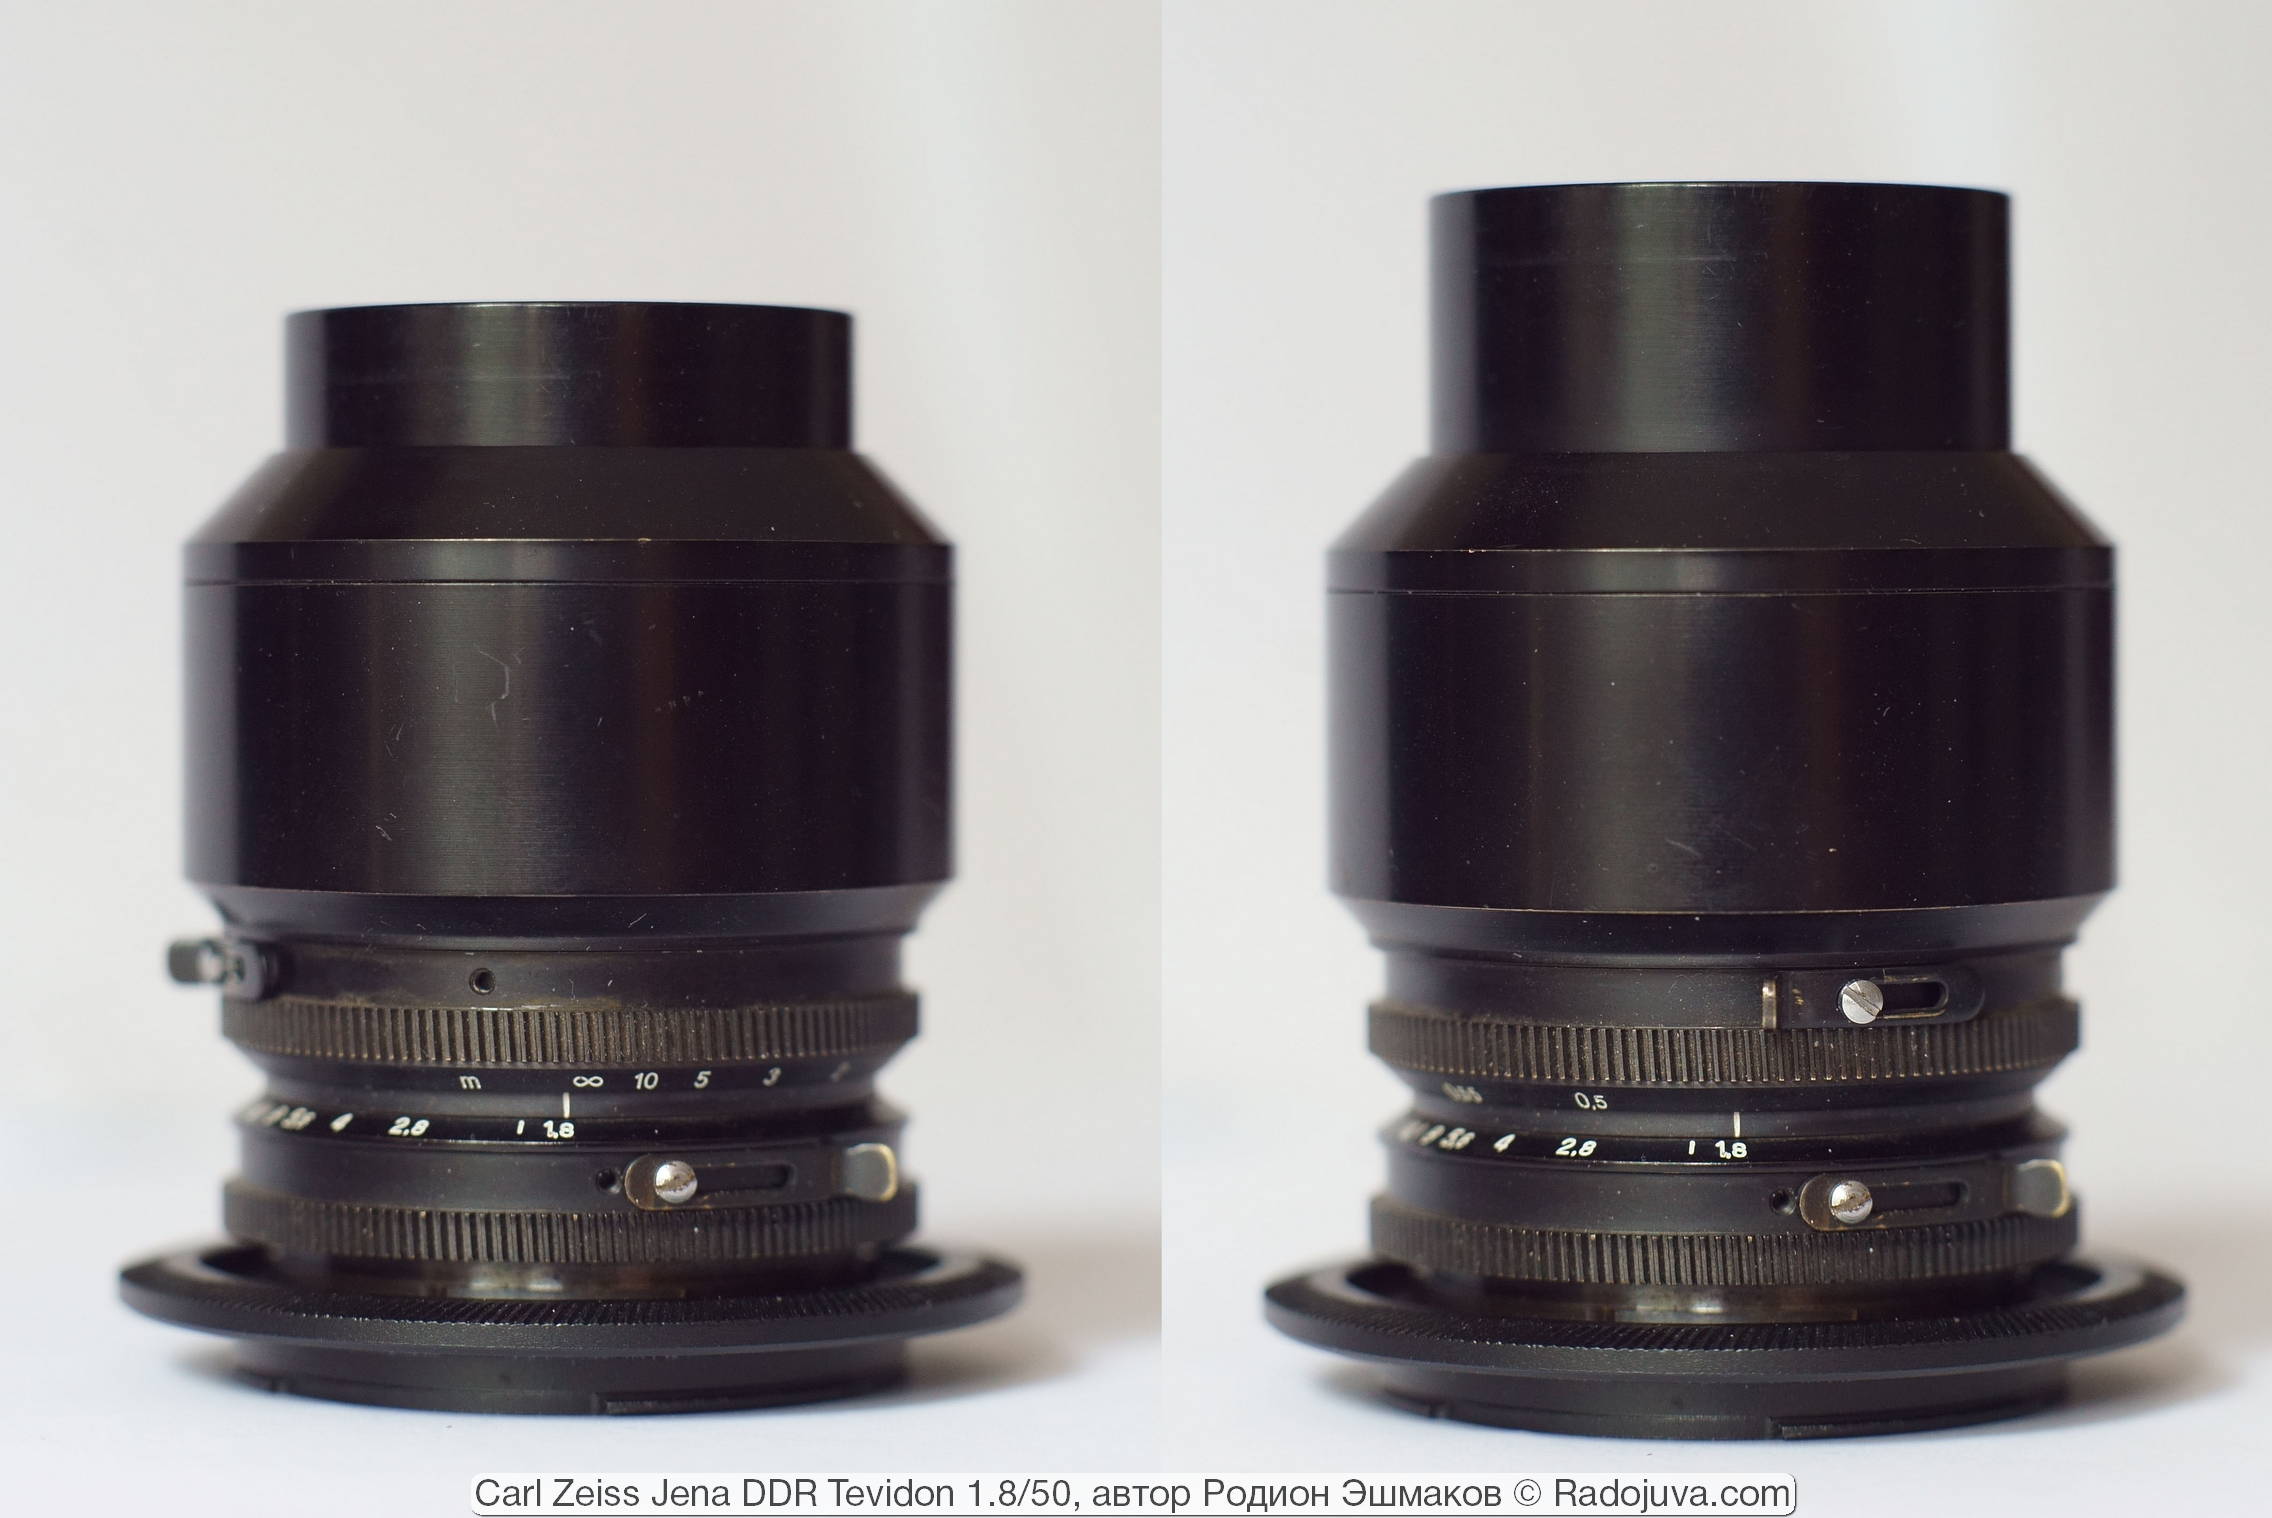 Change in lens length when focusing from infinity to MDF.